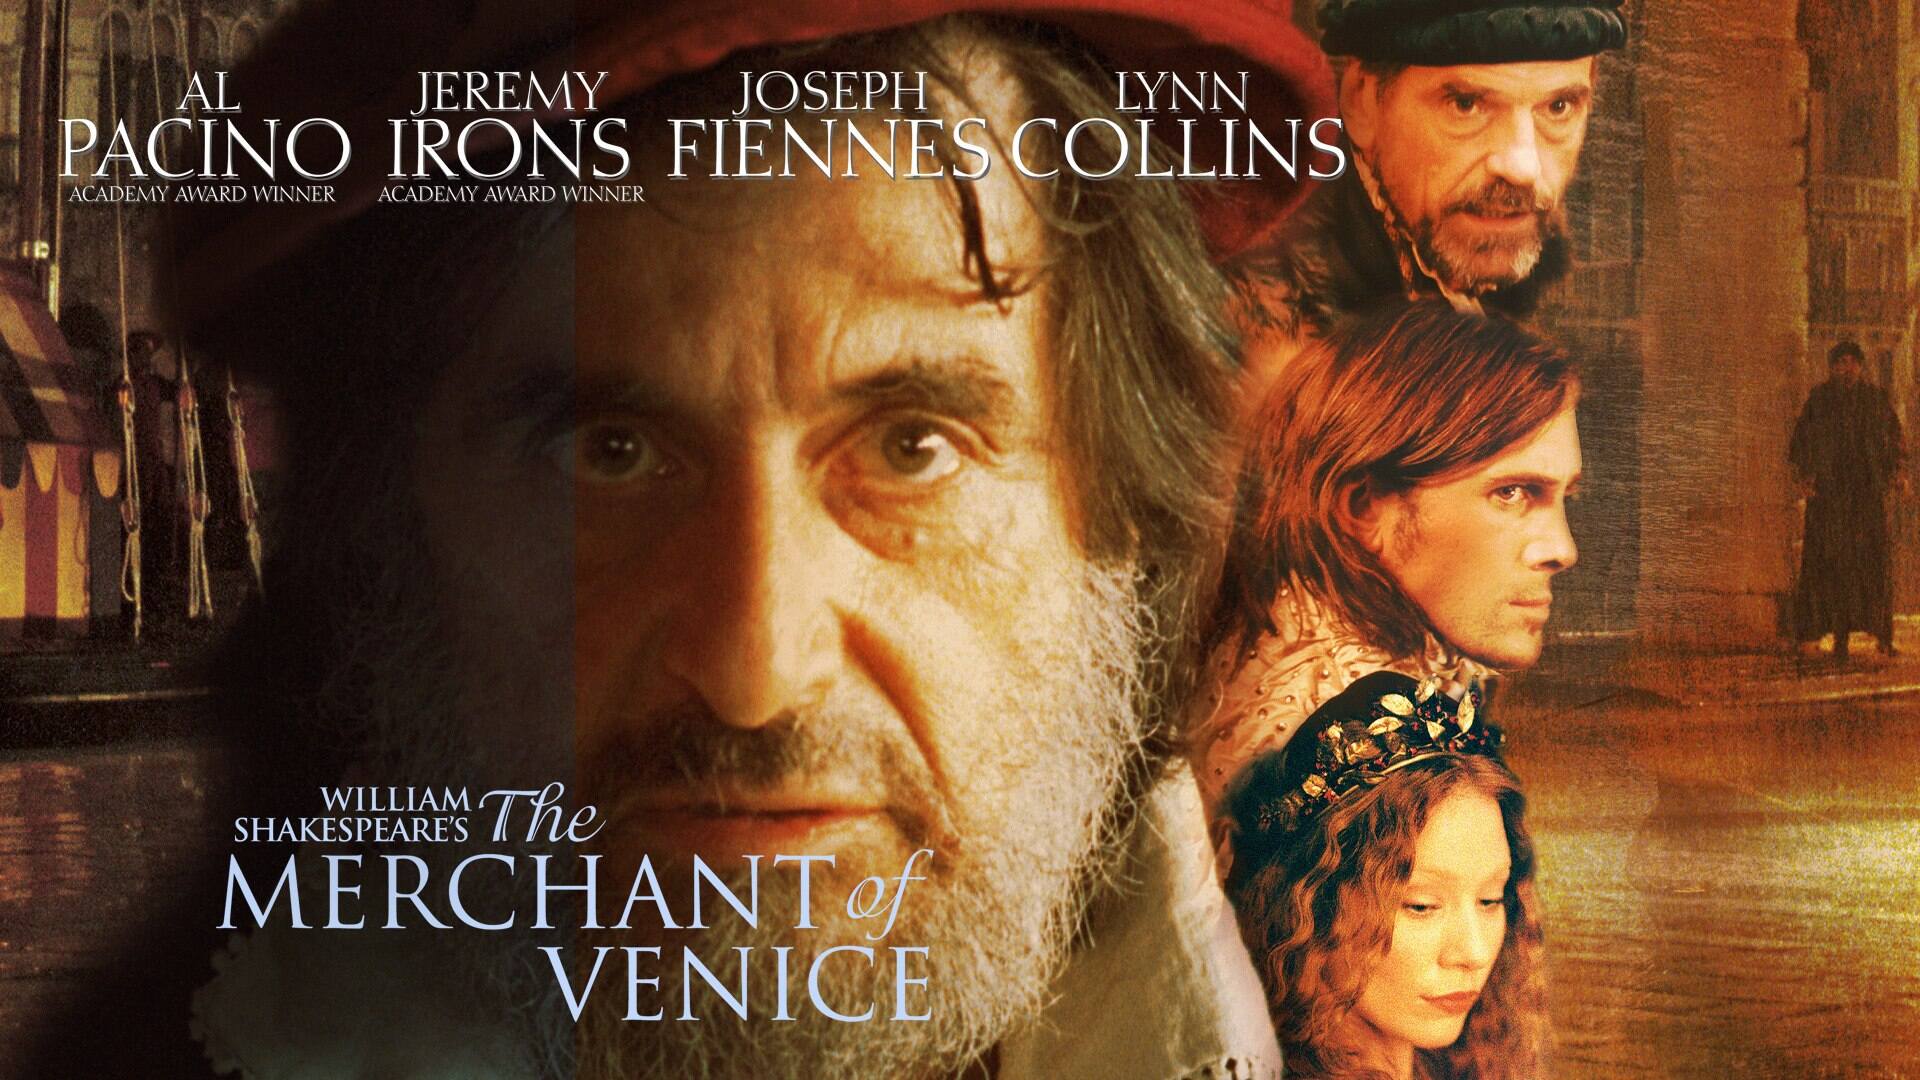 44 Facts about the movie The Merchant of Venice - Facts.net